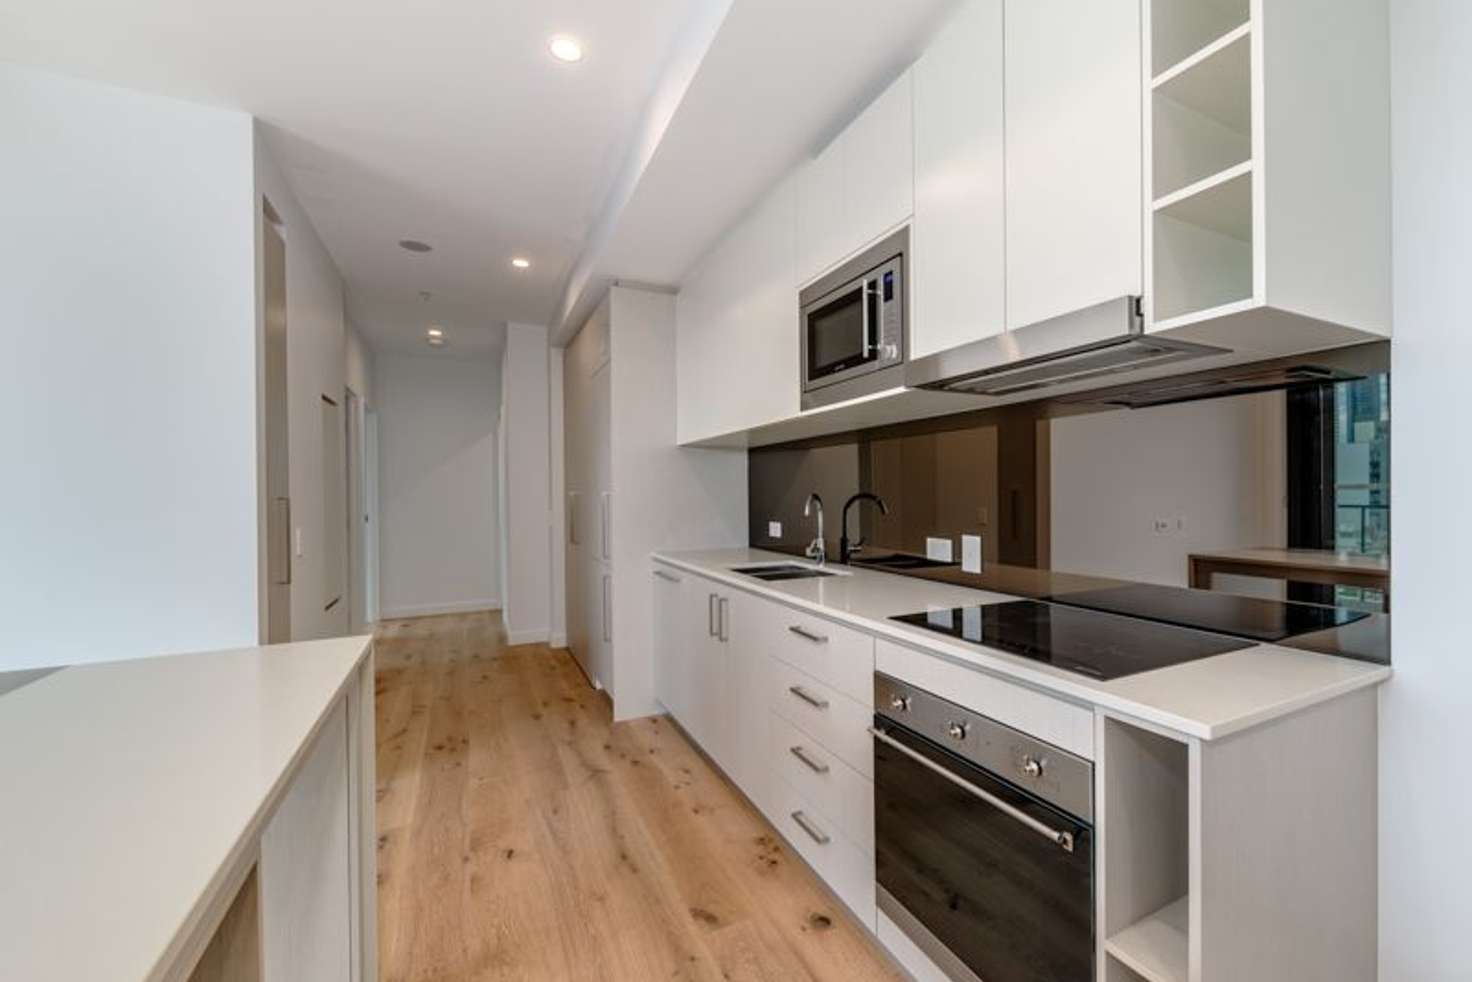 Main view of Homely apartment listing, 601/380 Murray Street, Perth WA 6000